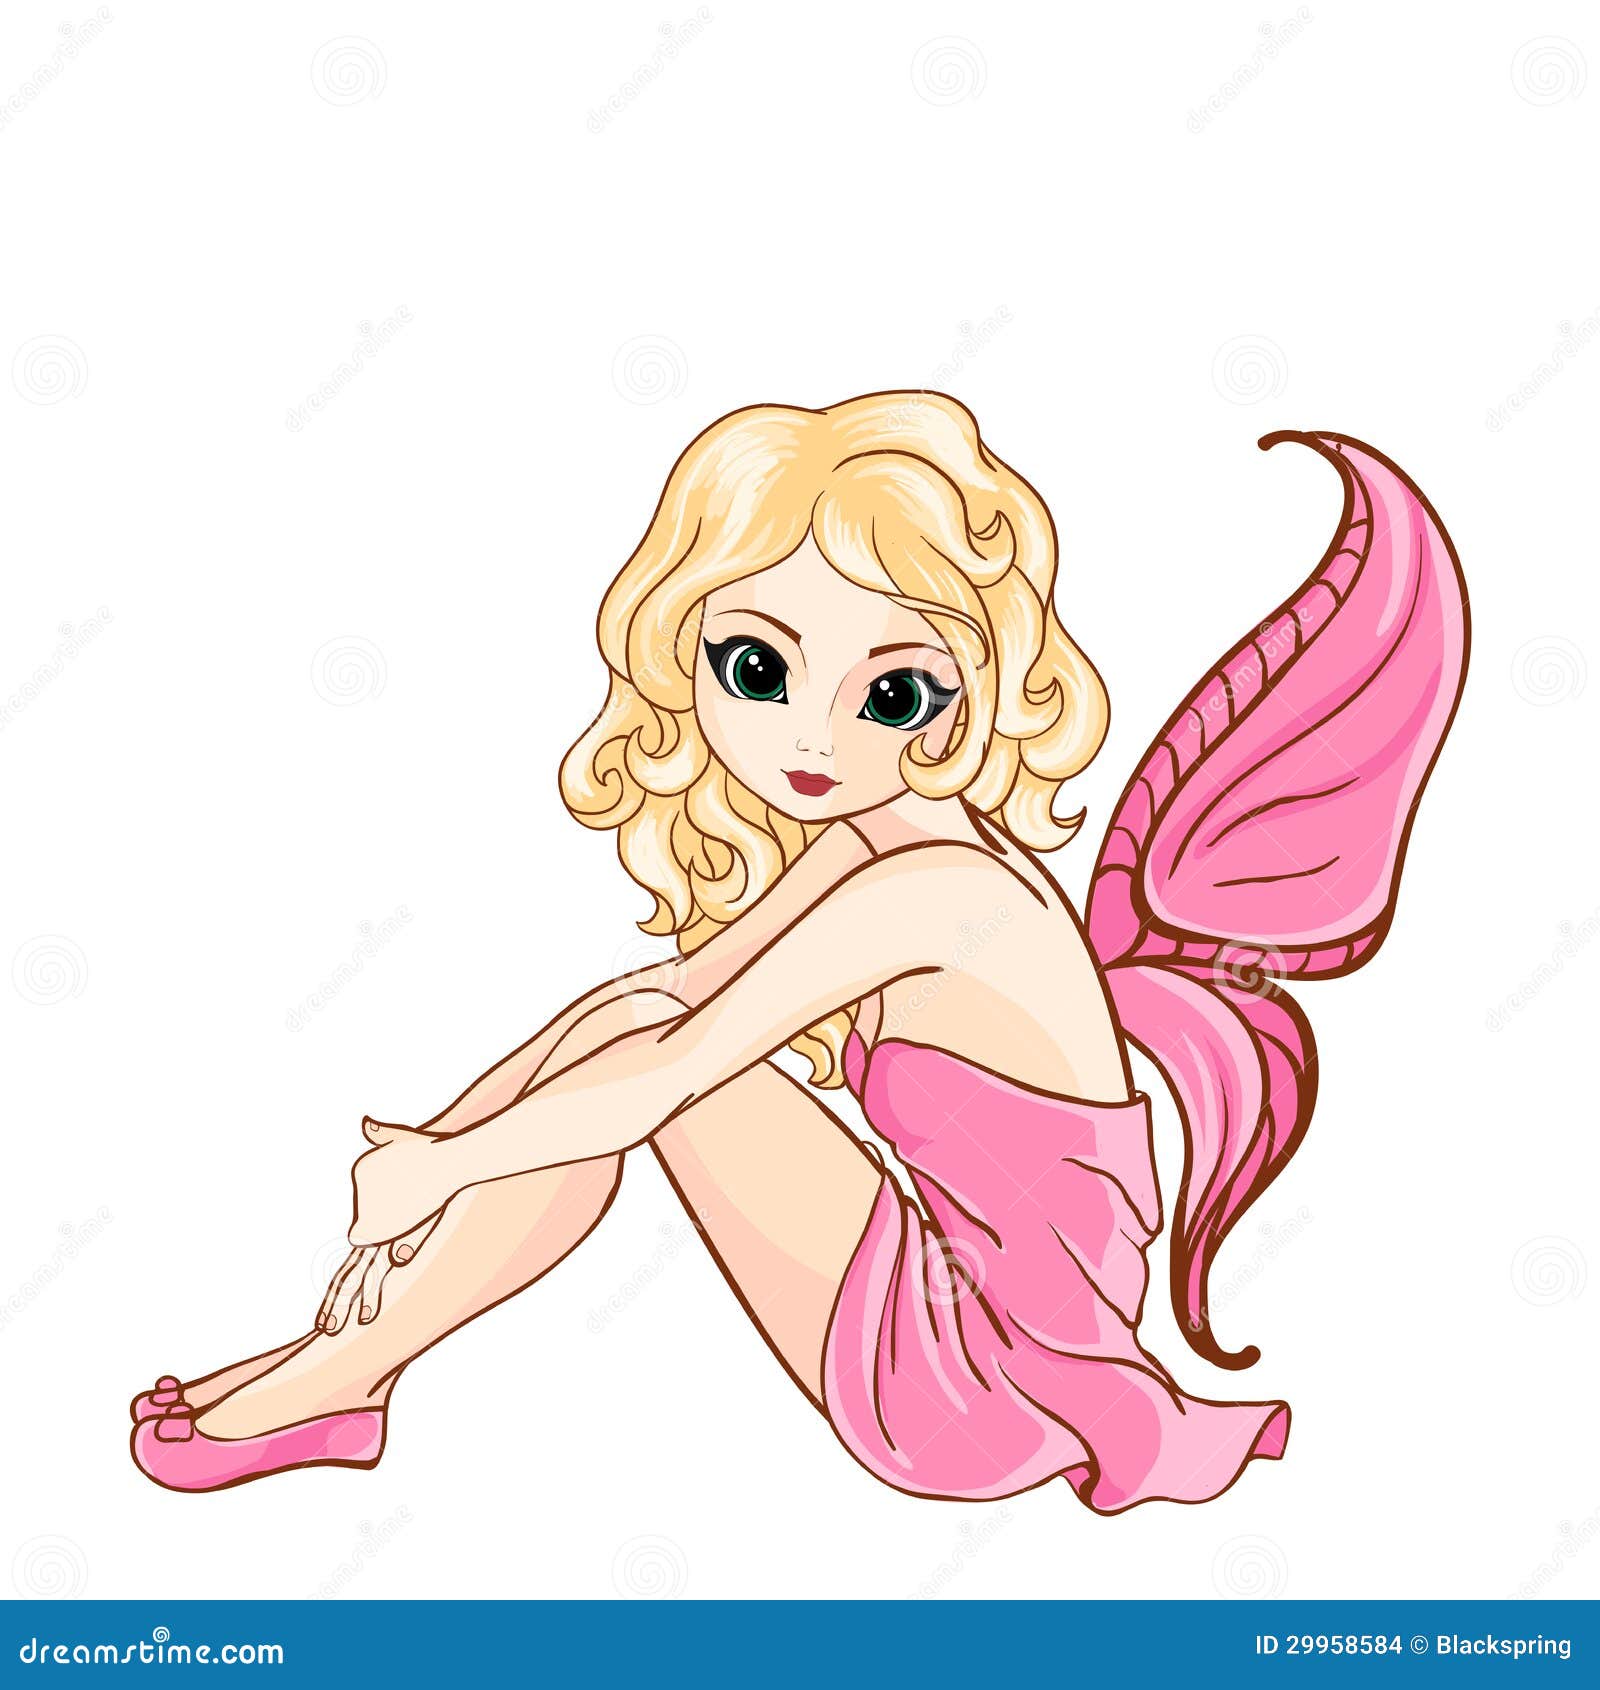 Little Cartoon Fairy In Pink Dress Stock Images - Image: 29958584